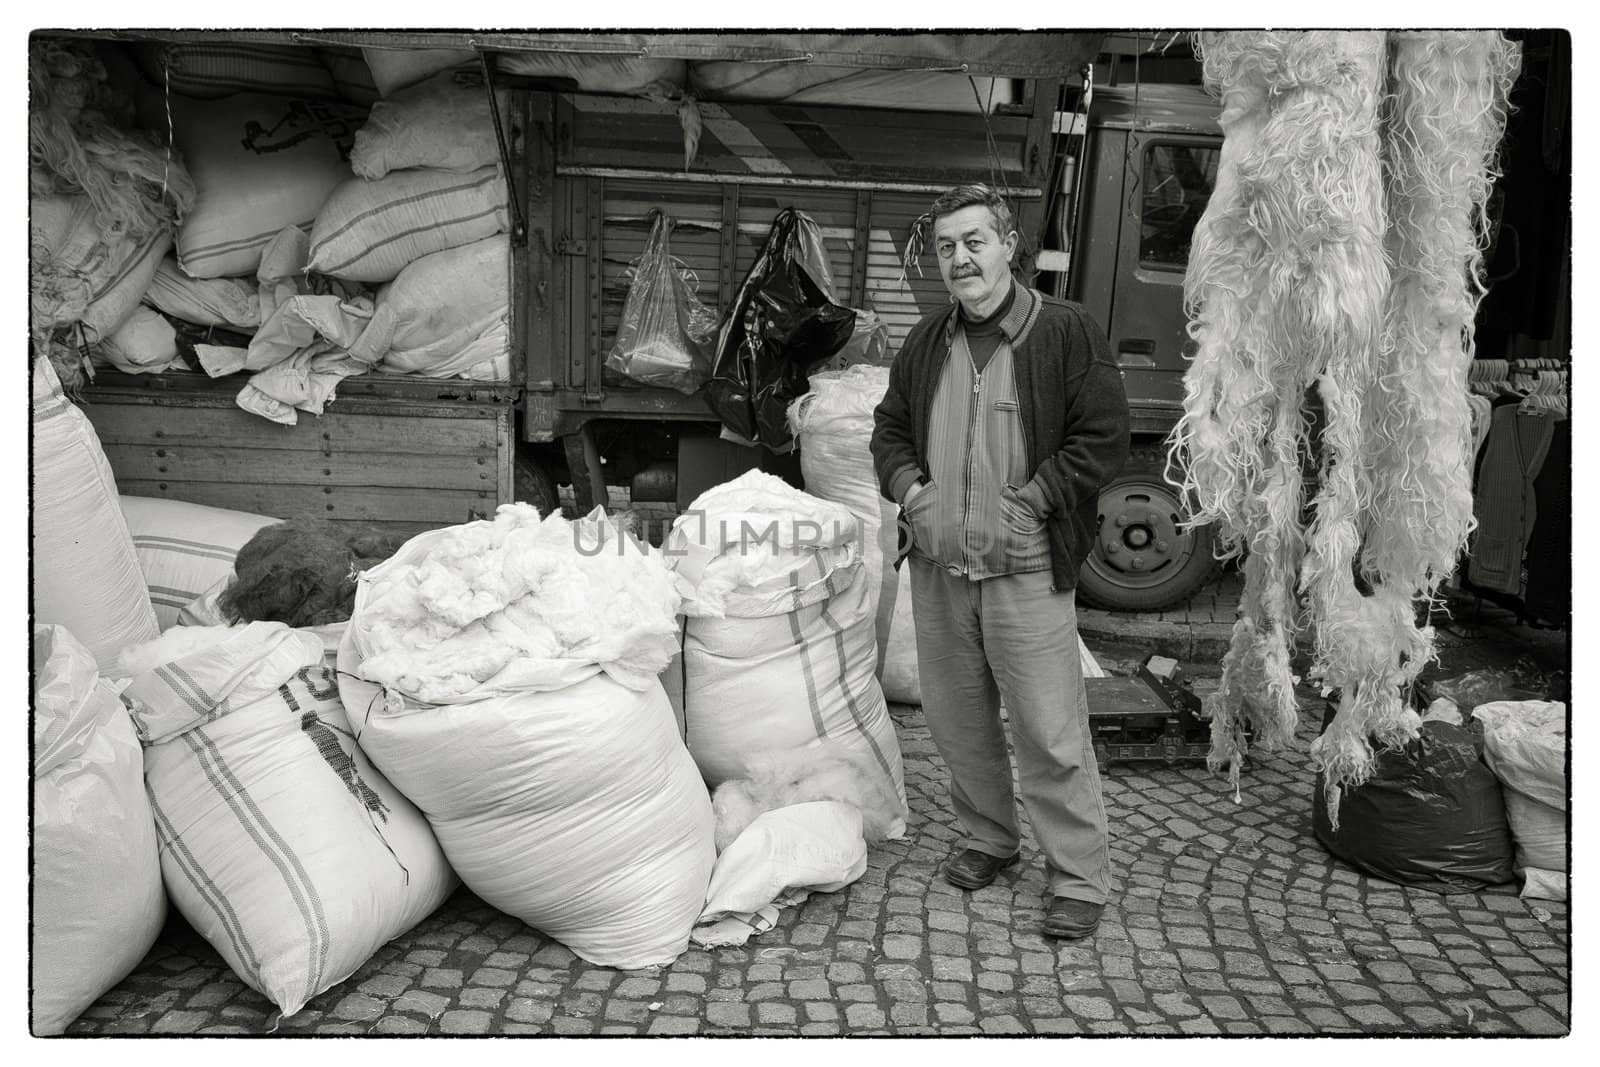 TURKISH WOOL SALESMAN, ISTANBUL, TURKEY, APRIL 11, 2012: Man in front of his wool shop near the bazaar in the Fatih district of Istanbul, Turkey.